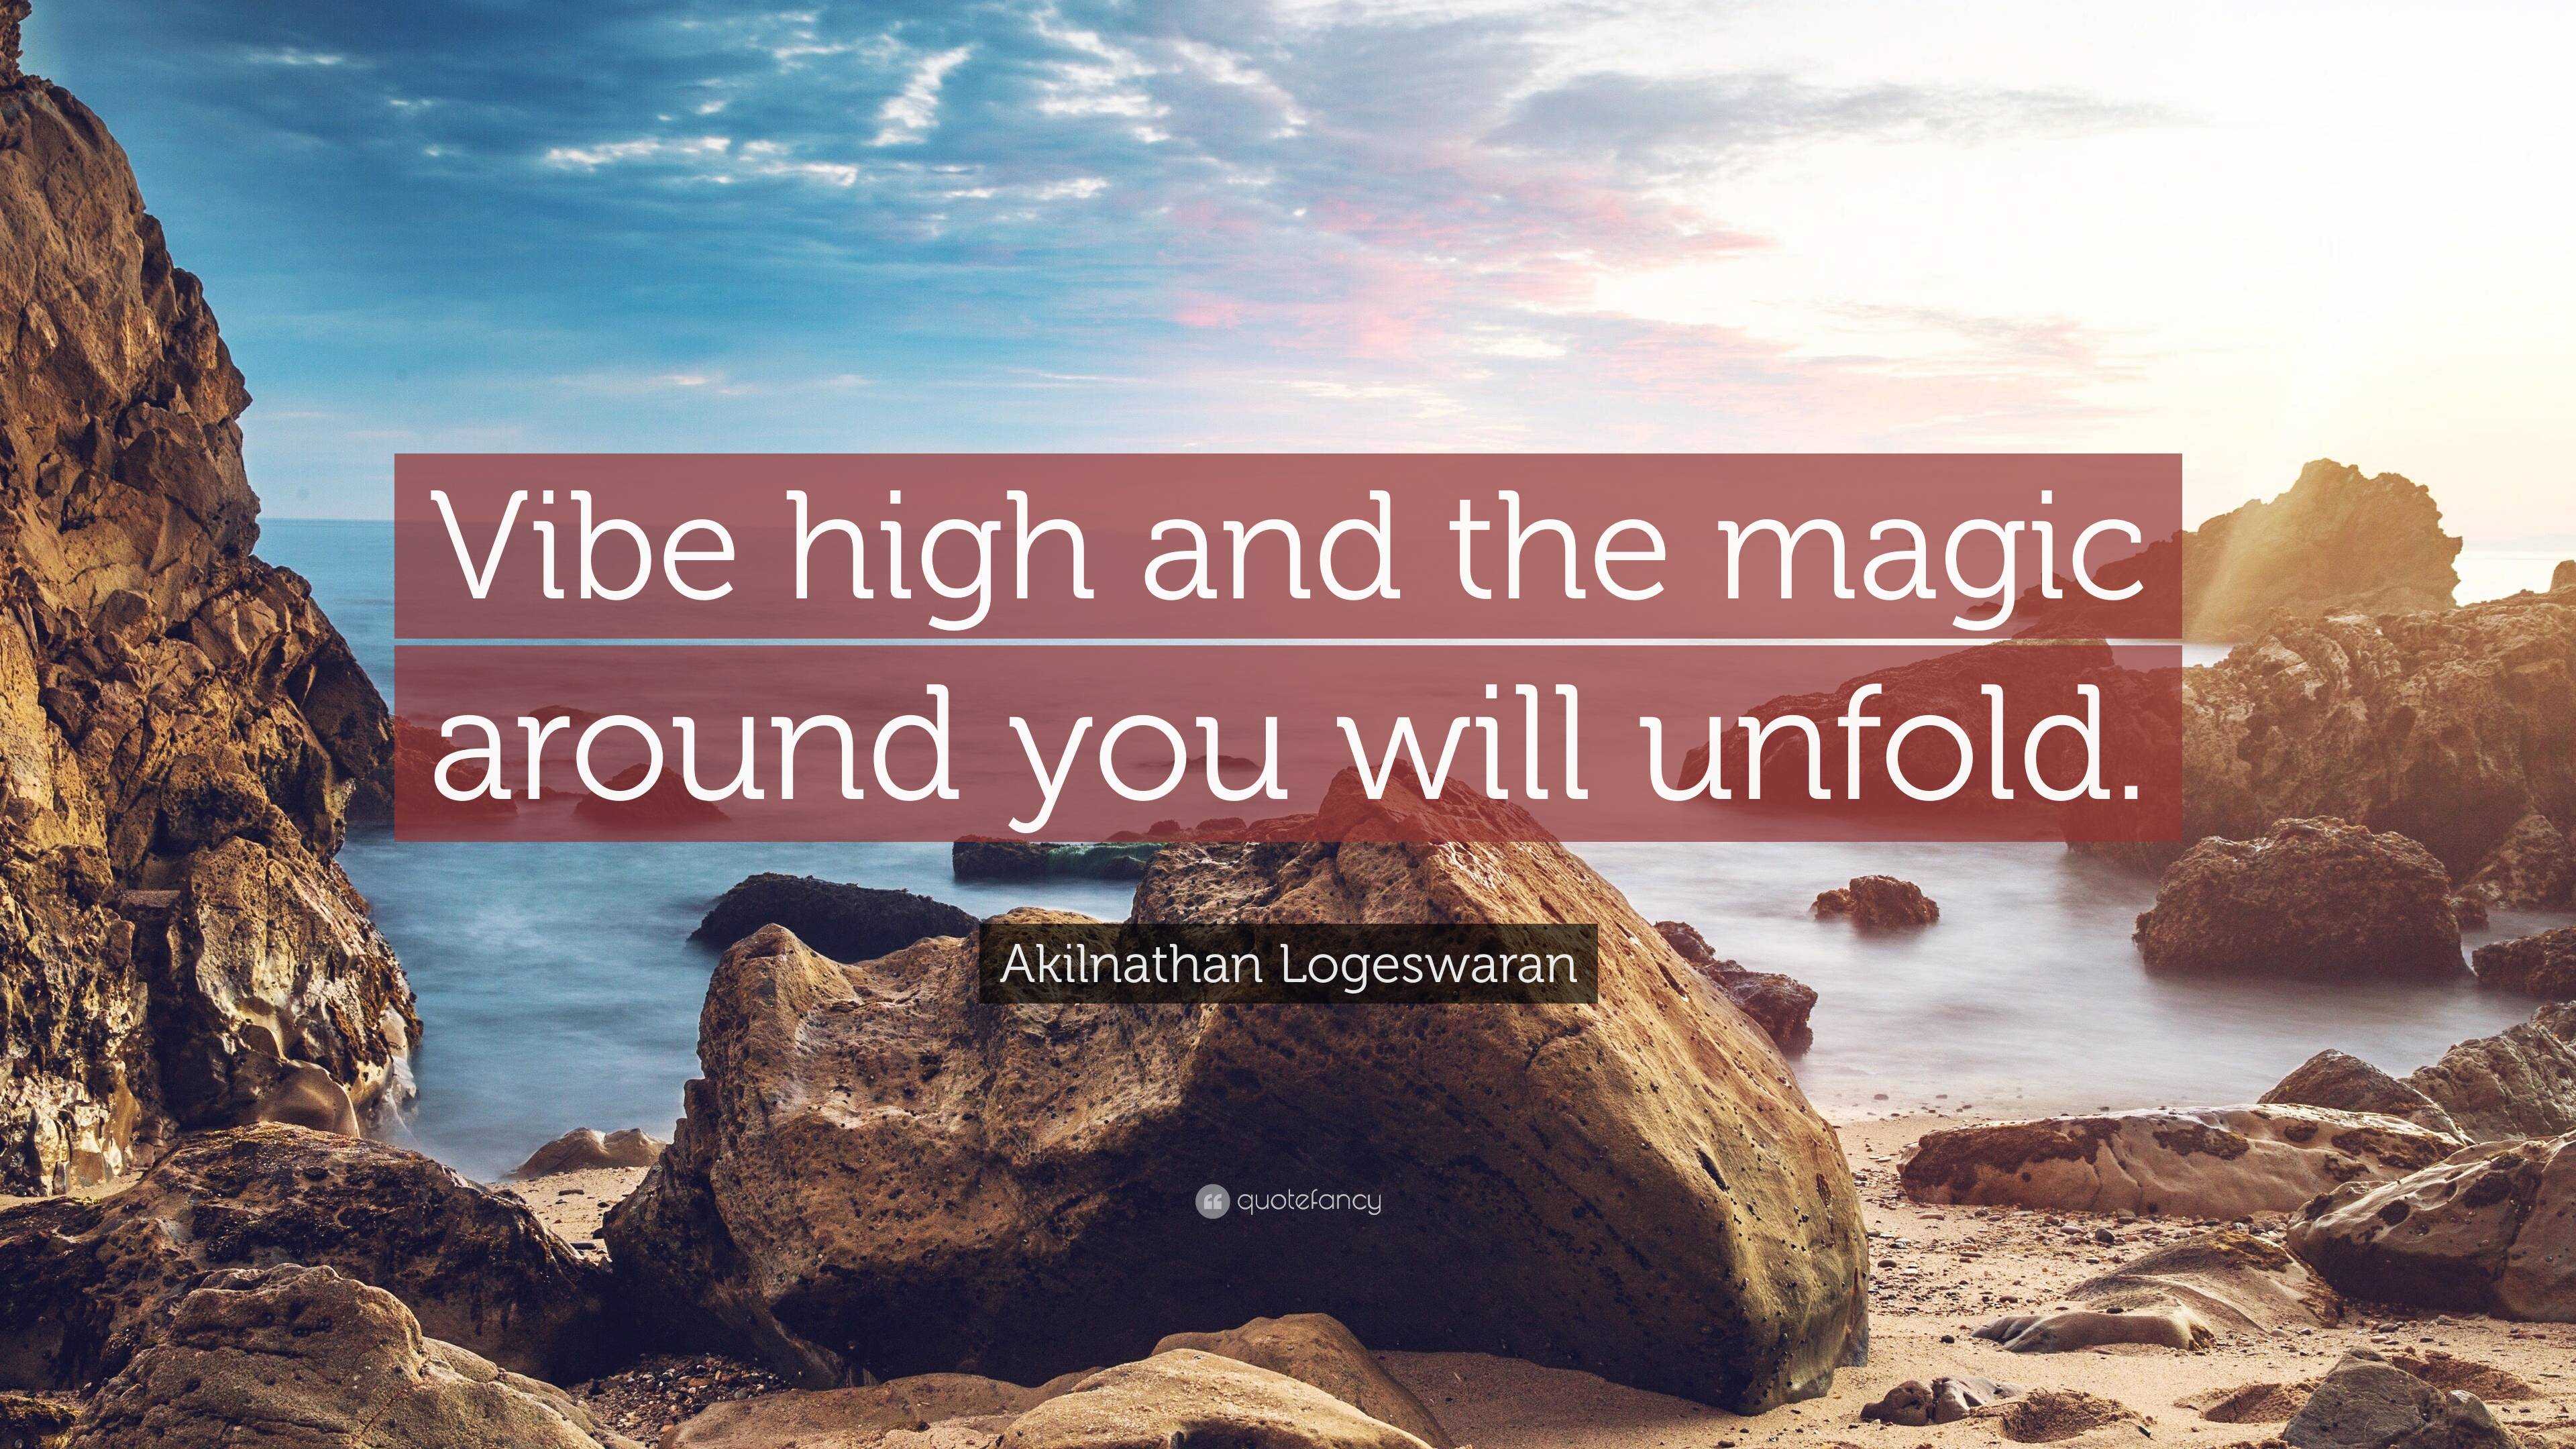 Turn Your Journey Into Your Destination and Watch Magic unfold - R Quotes -  Medium